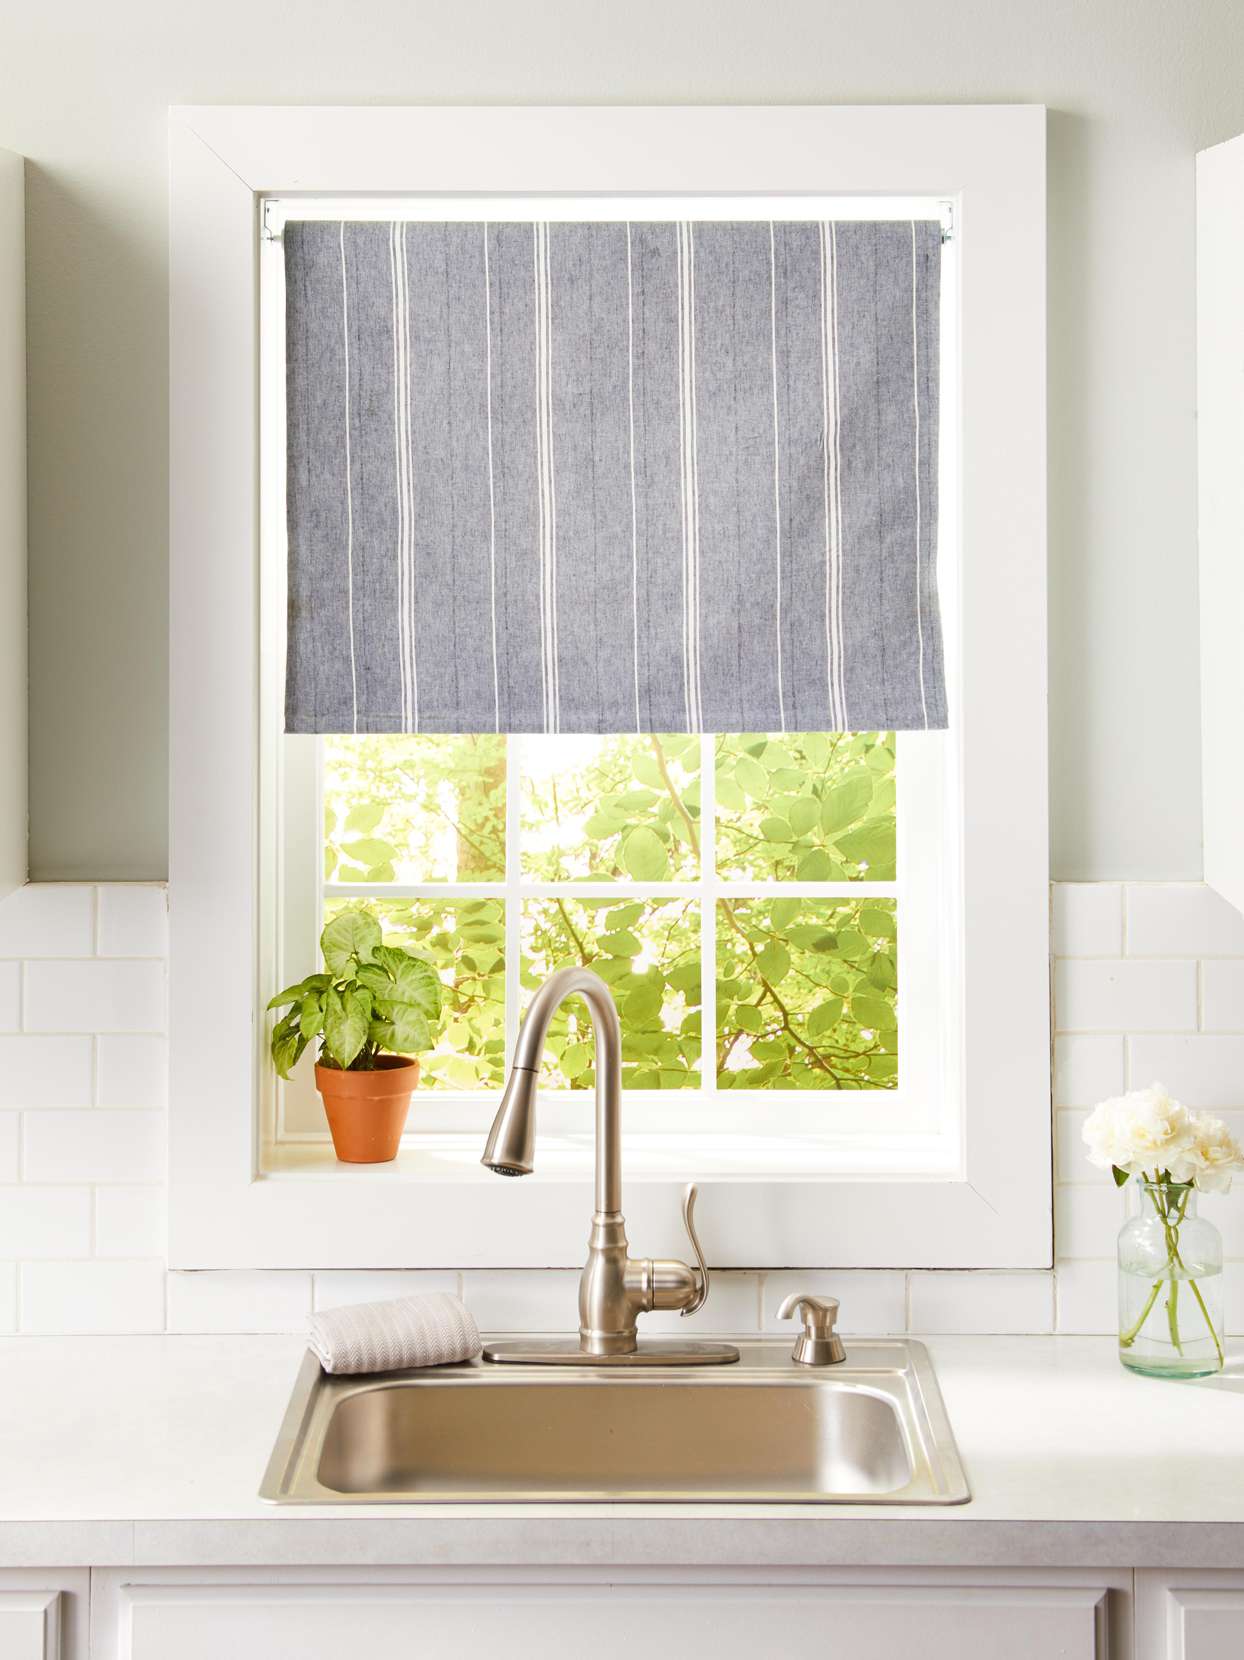 Over The Sink Kitchen Window Treatments Hot Sale, 18 OFF   www ...